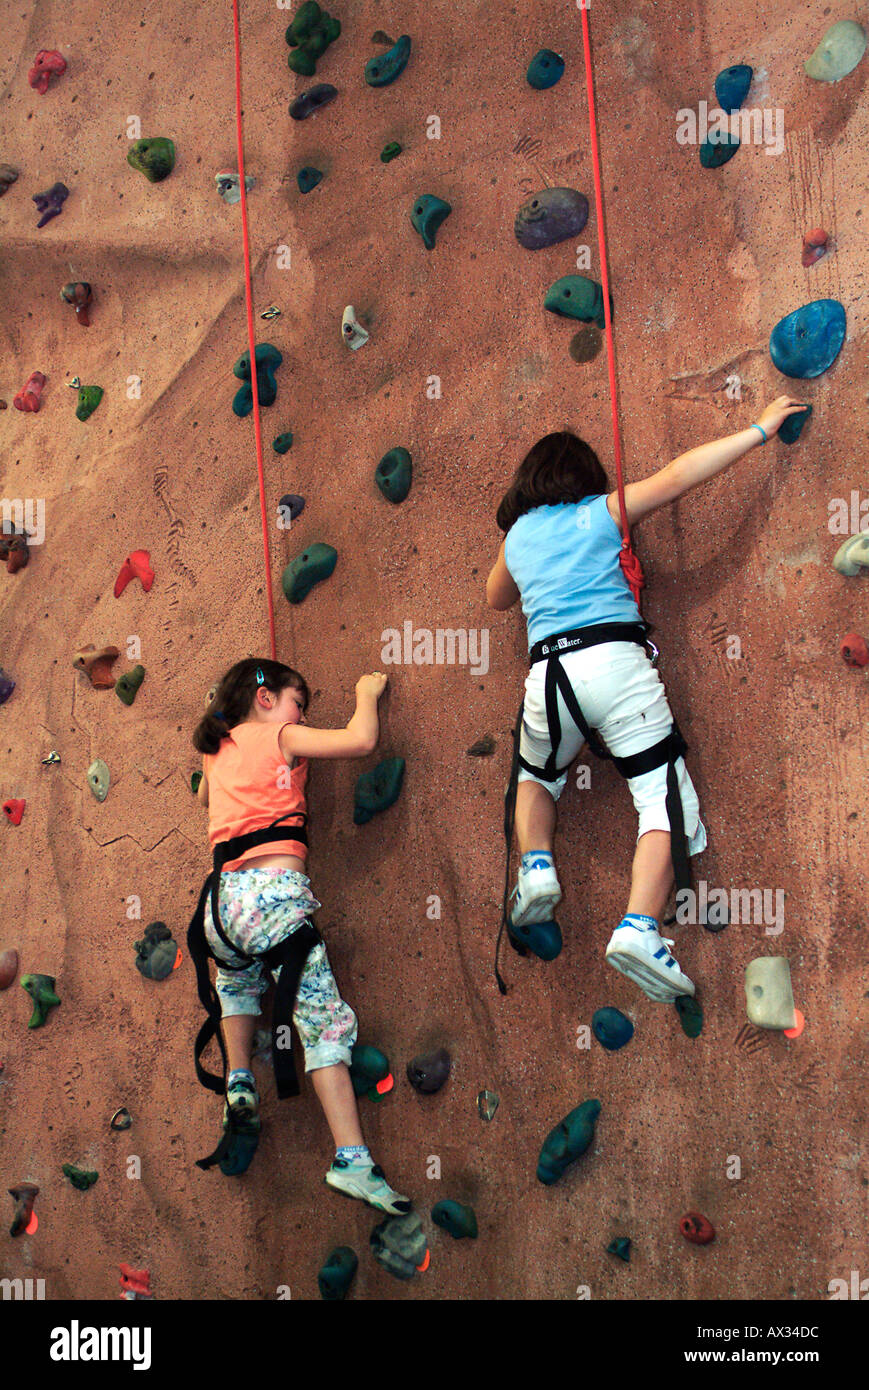 Kids Climbing the Wall at Indoor Recreation Facility Stock Photo